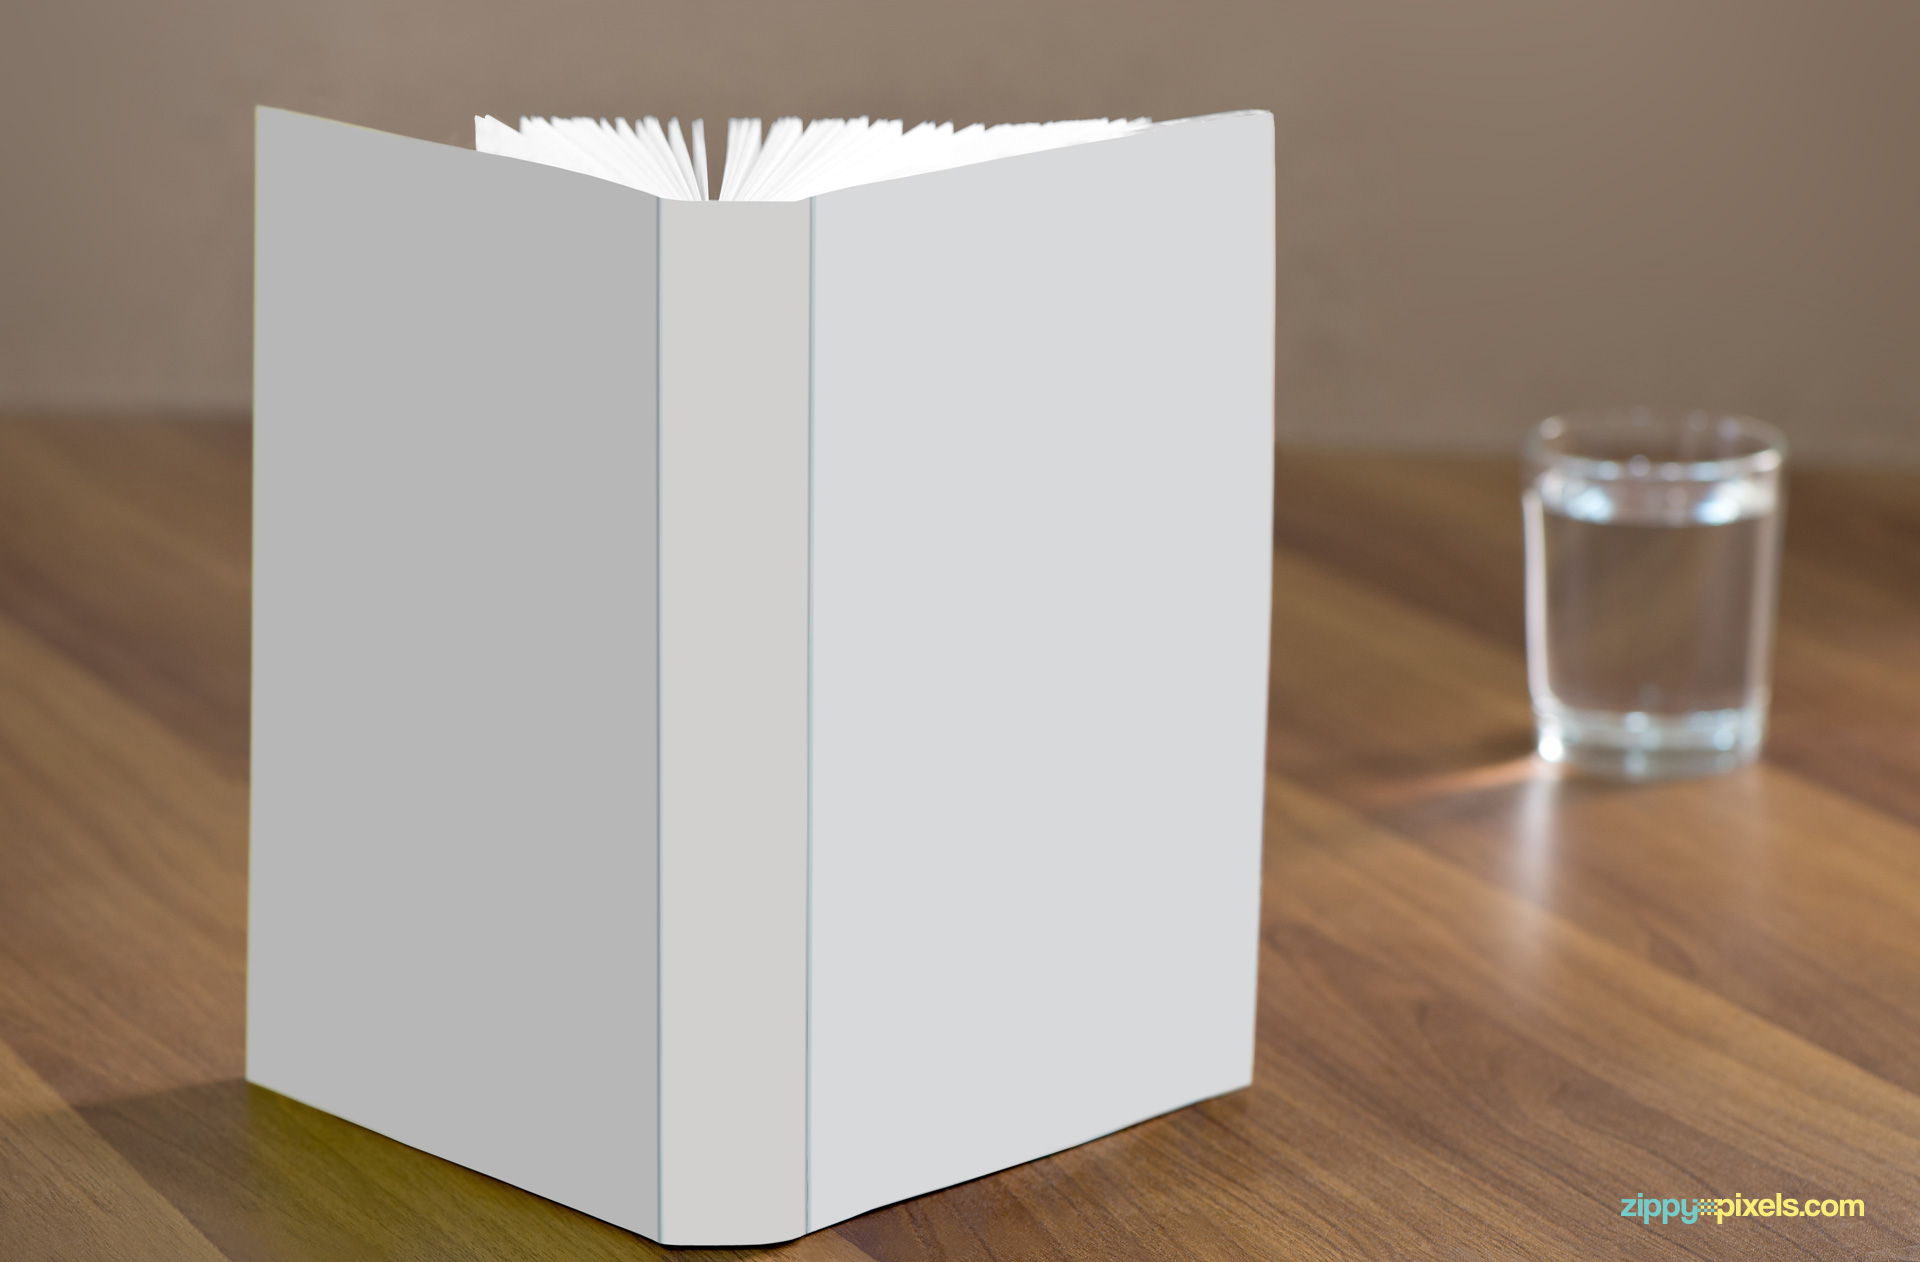 Use smart object in Photoshop to change the design of the book.